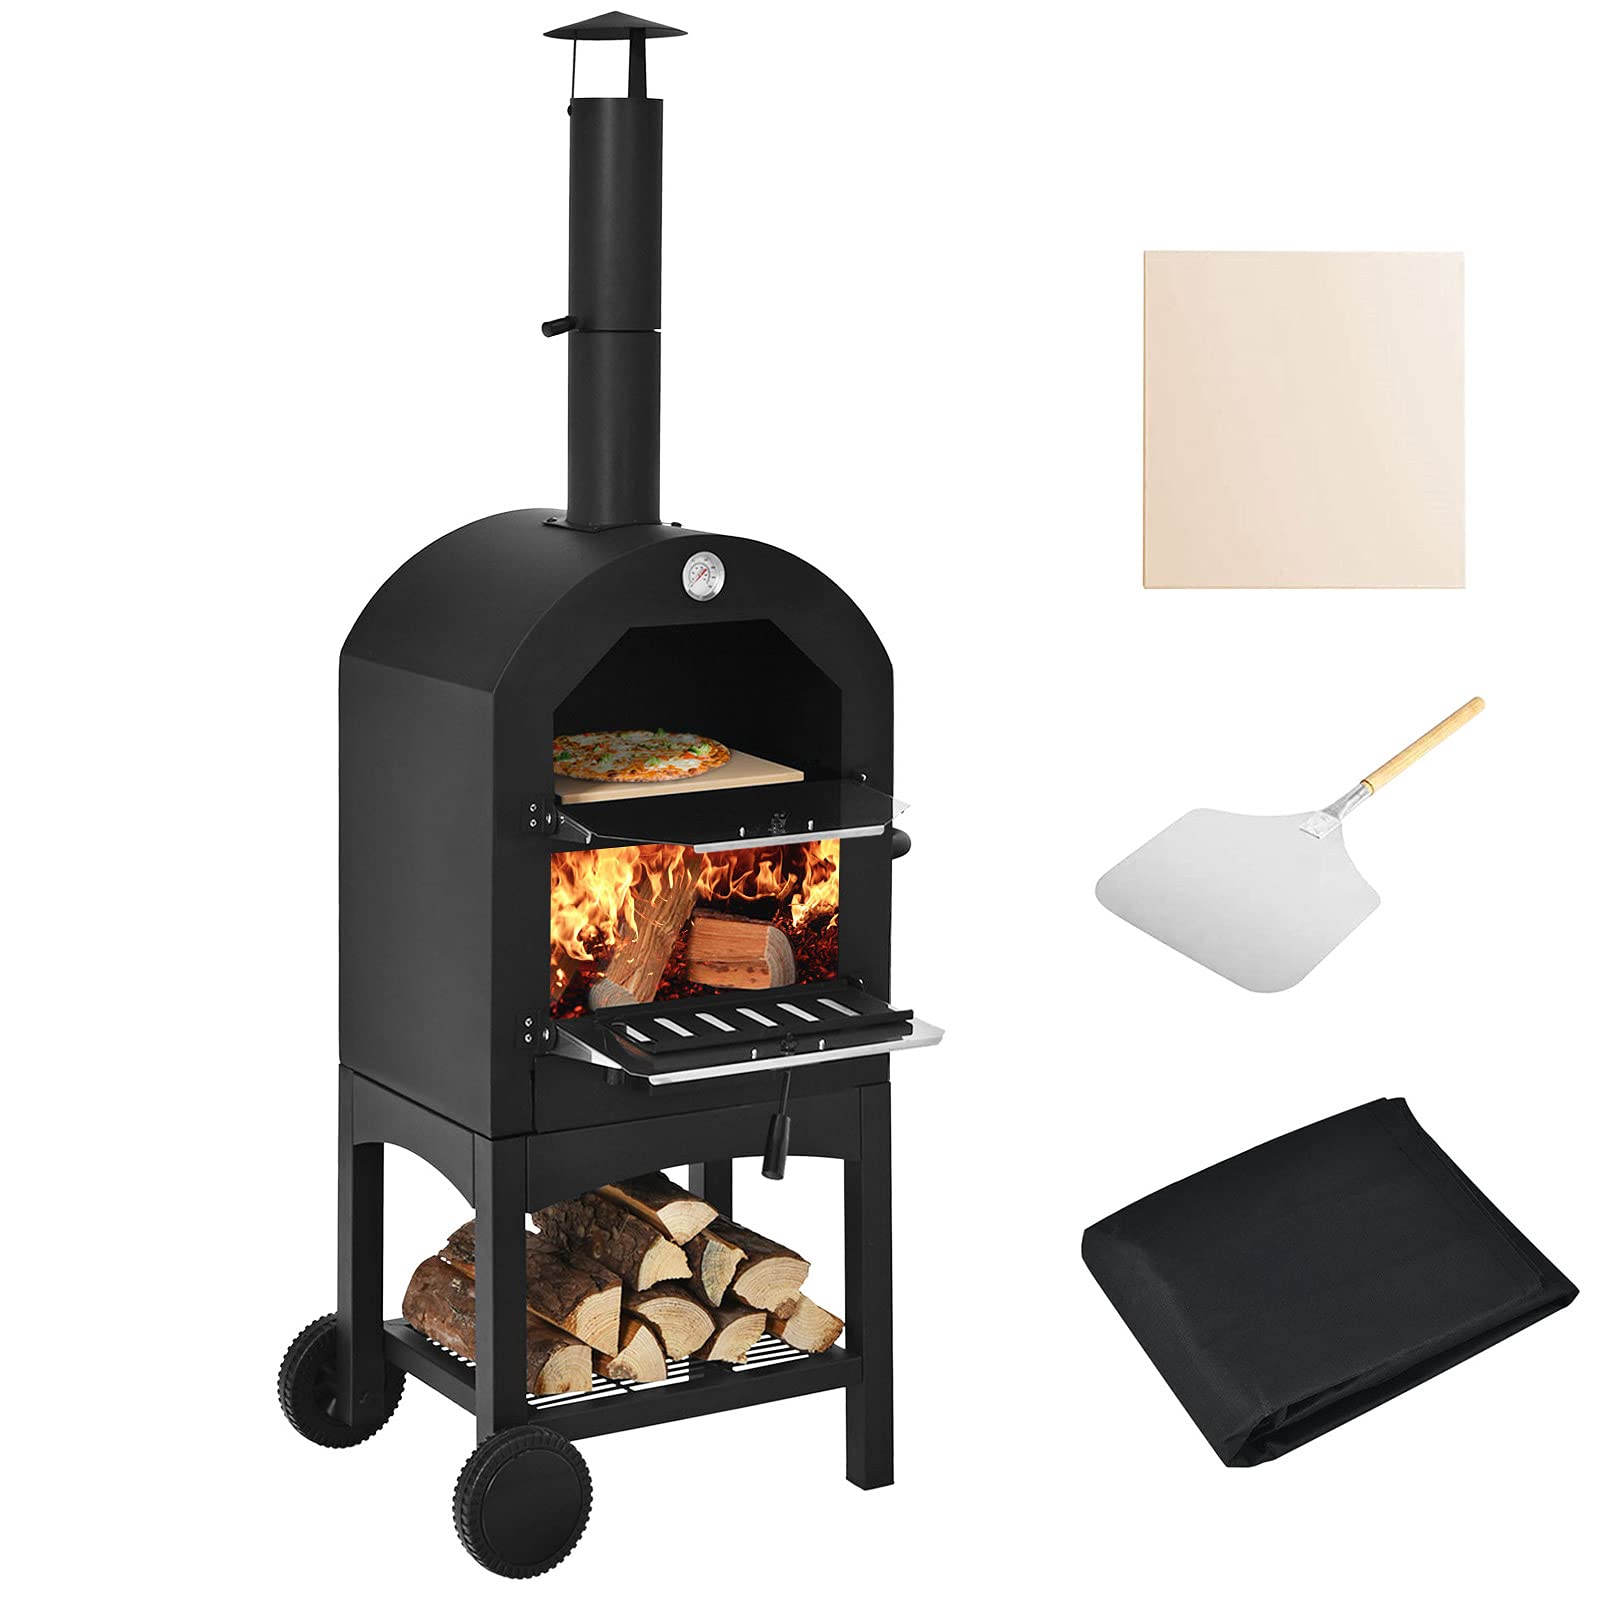 Giantex Pizza Oven Outdoor, Wood Fire Pizza Grill Maker with Waterproof Cover